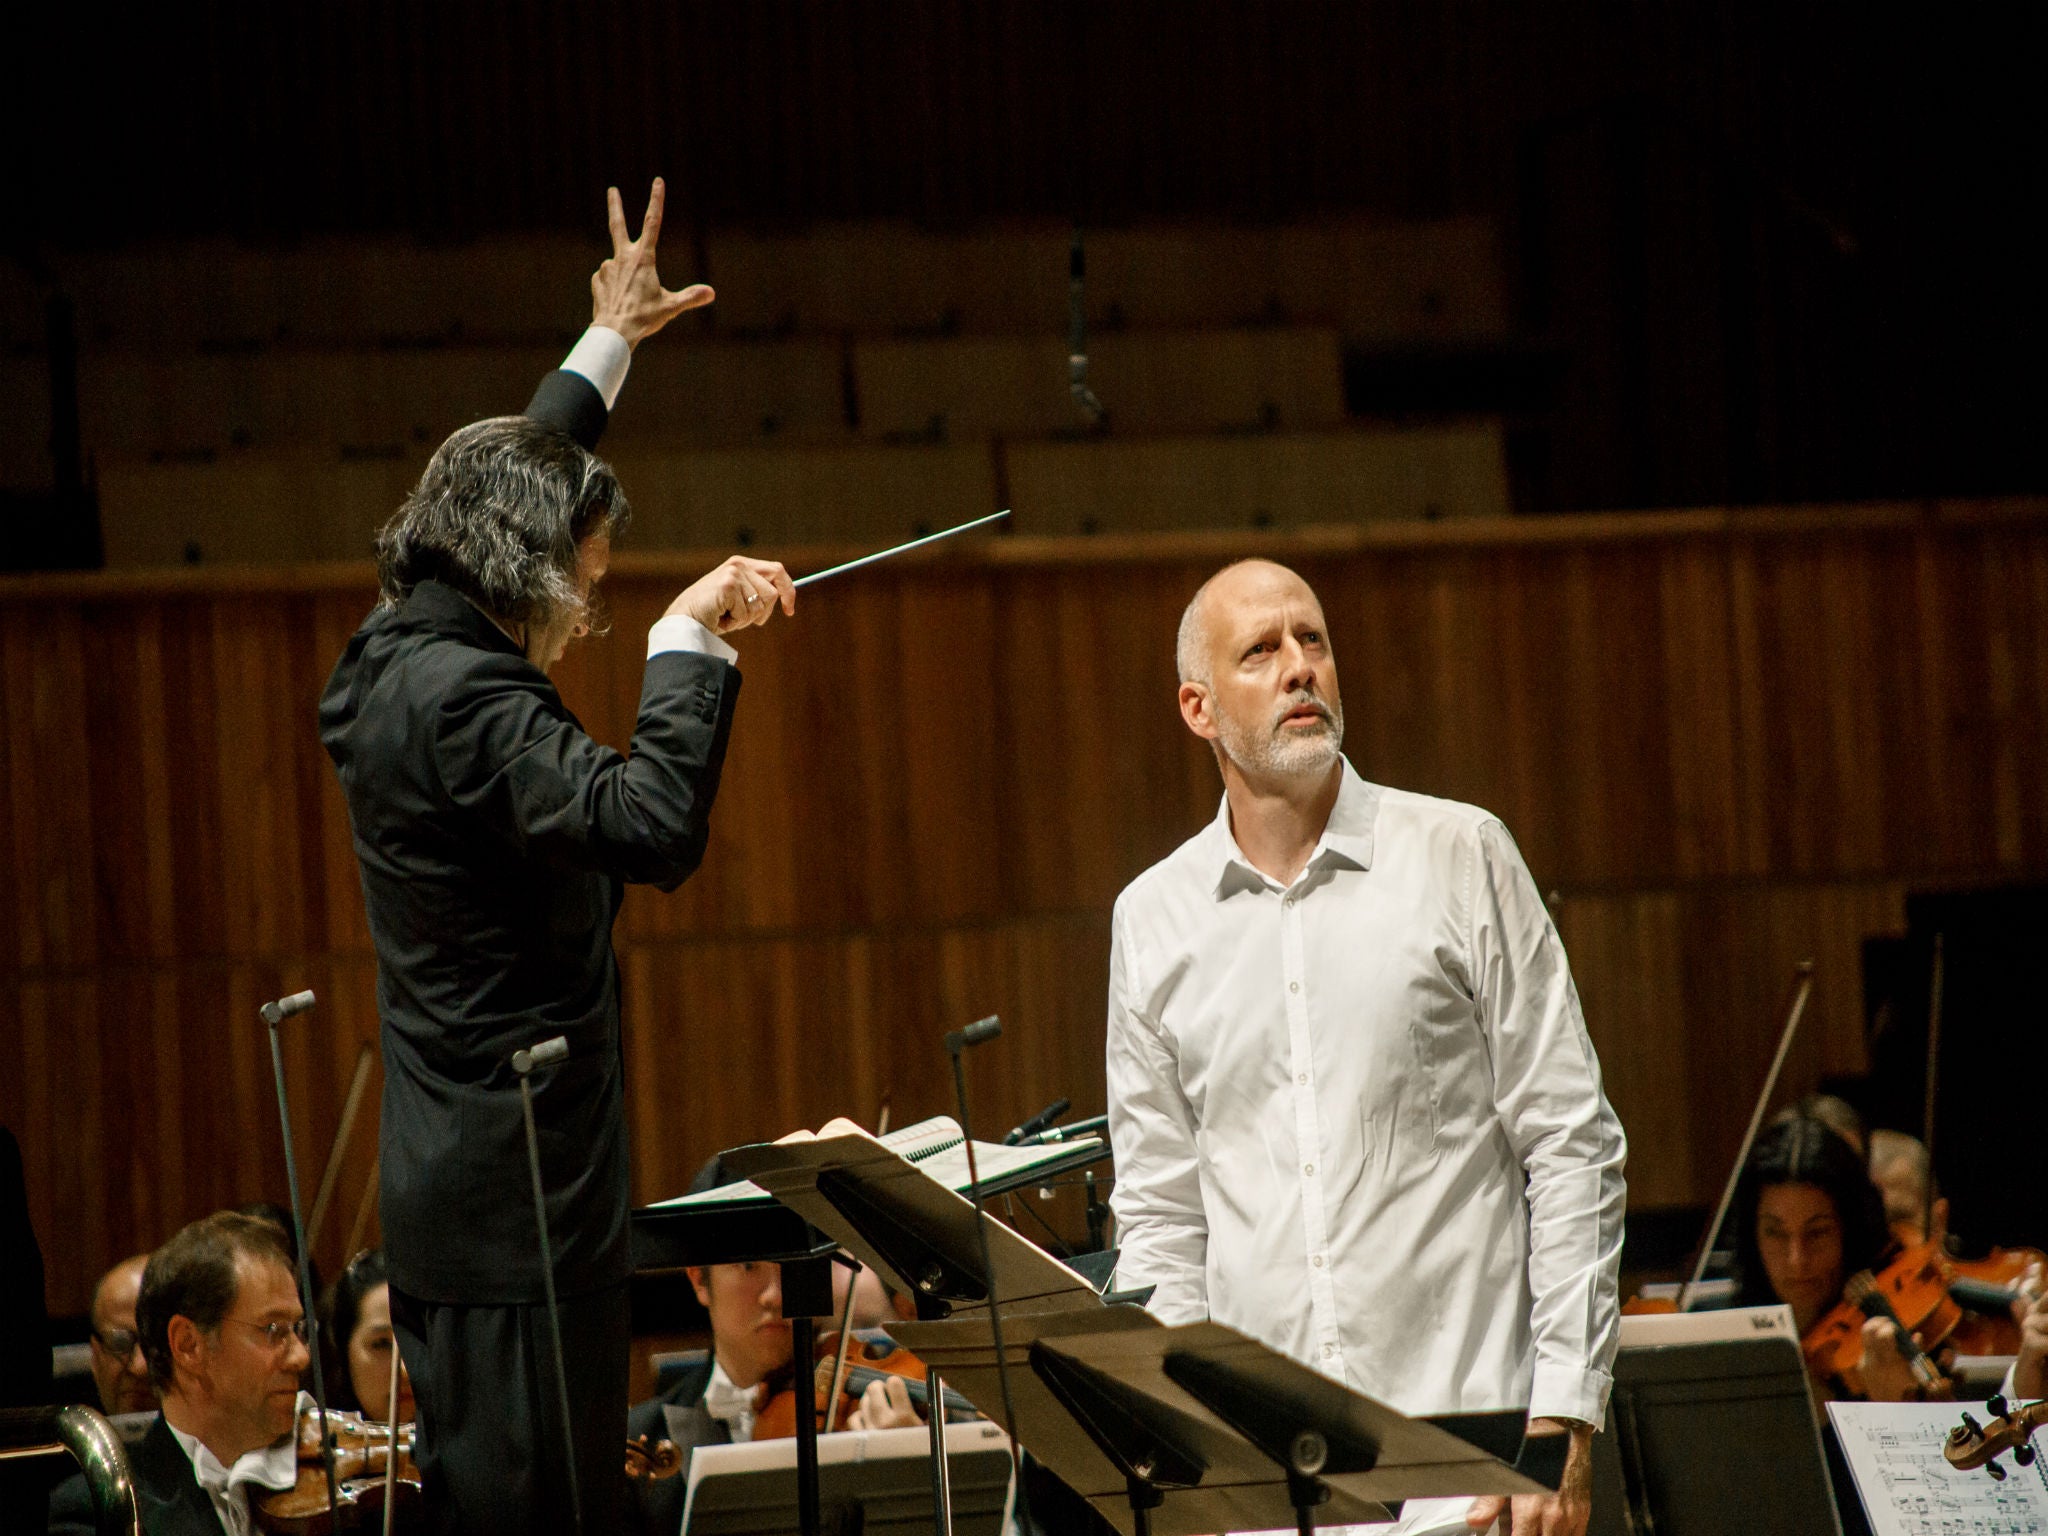 Vladimir Jurowski conducts the orchestra with baritone Paul Gay in the title role